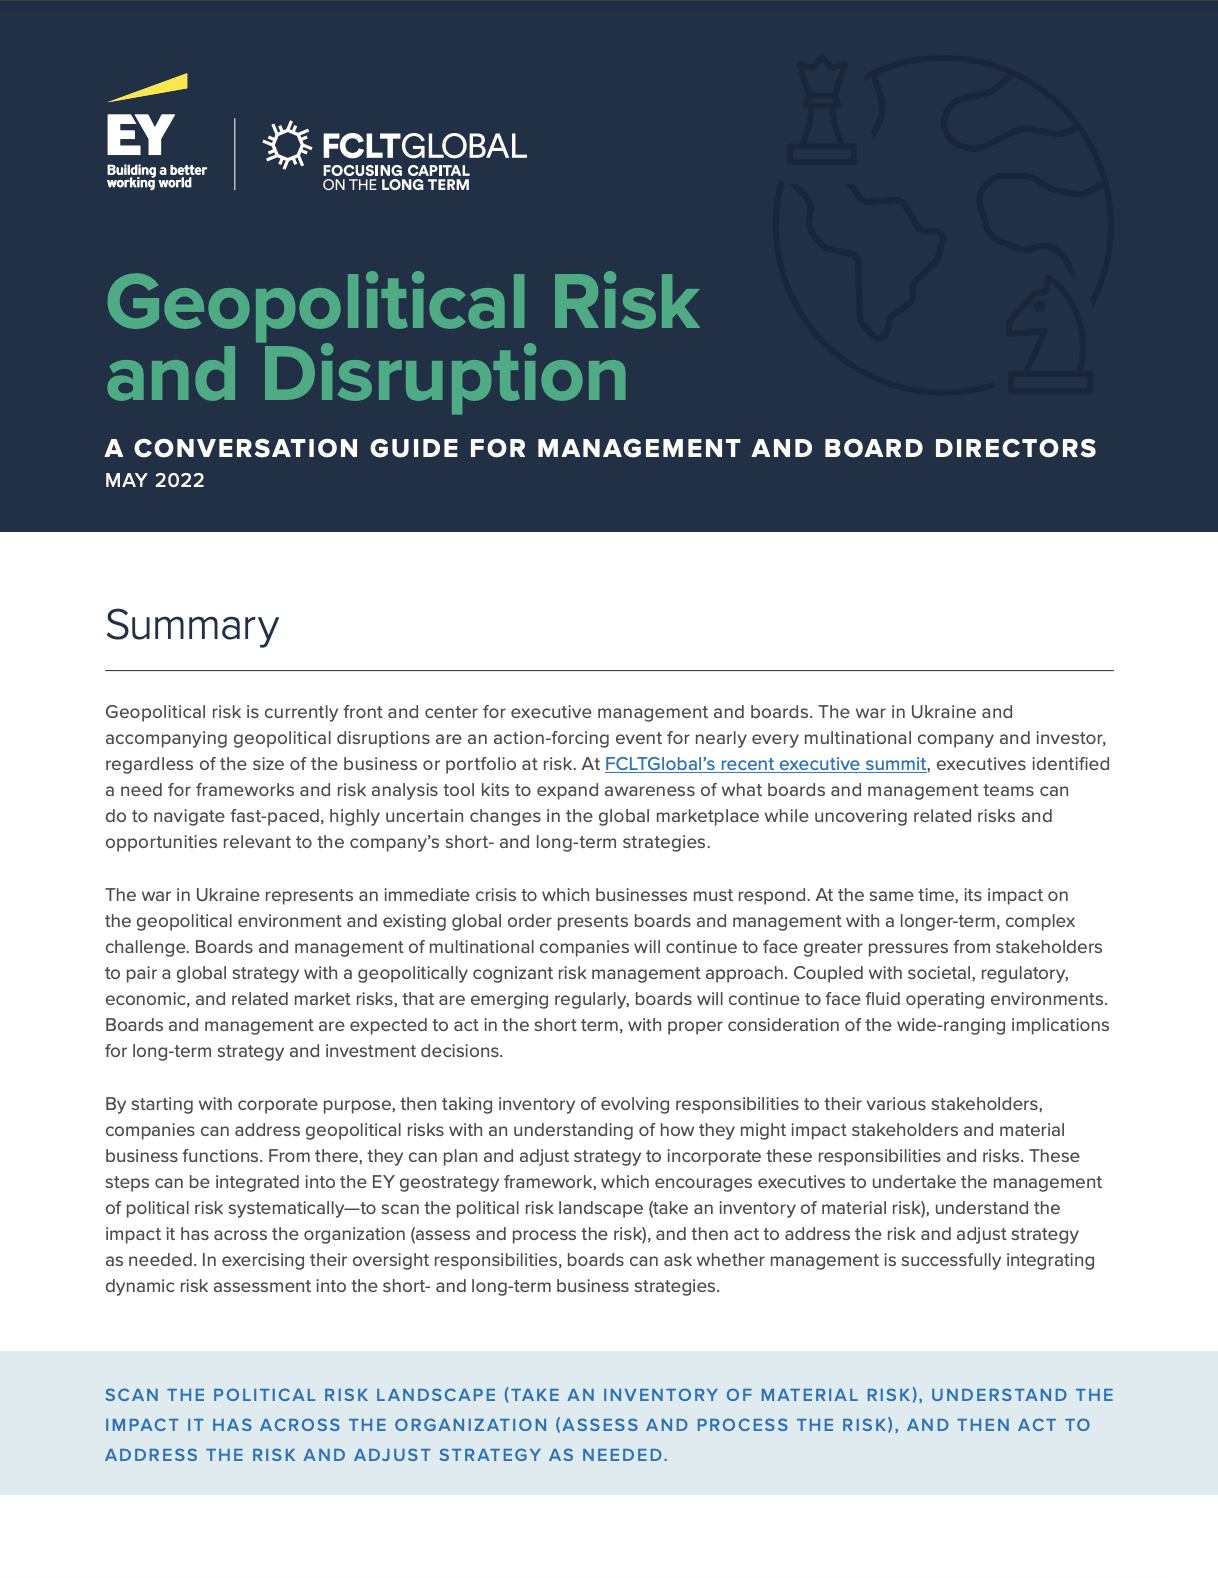 Geopolitical Risk and Disruption: A Conversation Guide for Management and Board Directors cover